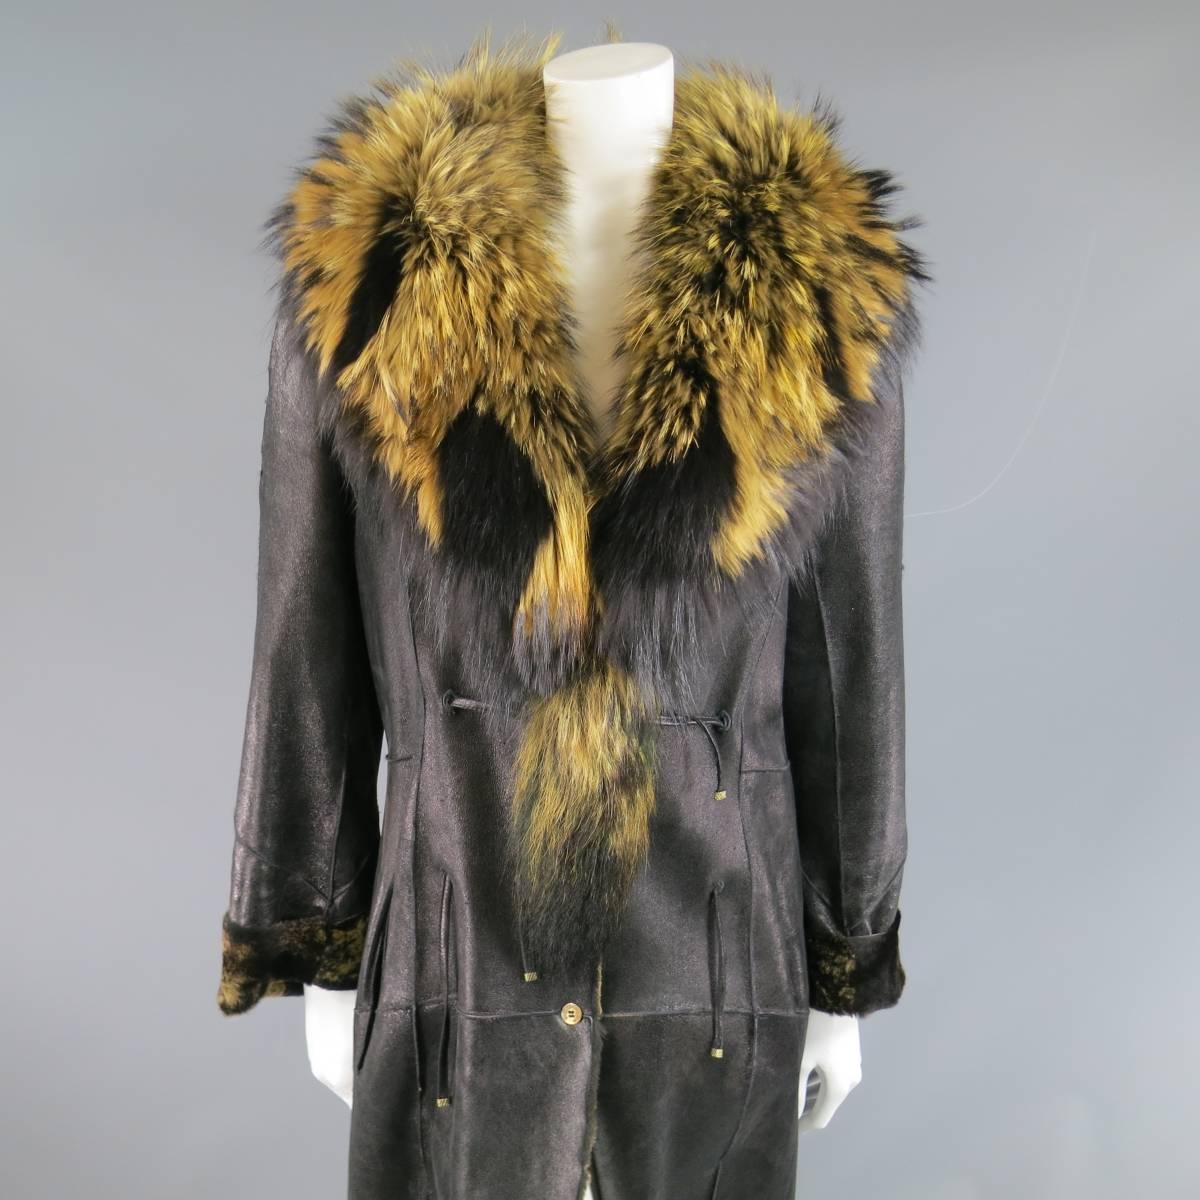 This fabulous ROBERTO CAVALLI coat comes in a shiny black patchwork leather shearing with caramel and black internal fur and features a detachable black and tan racoon fur collar with tail, button and tie closure, and cuffed sleeves. Minor wear